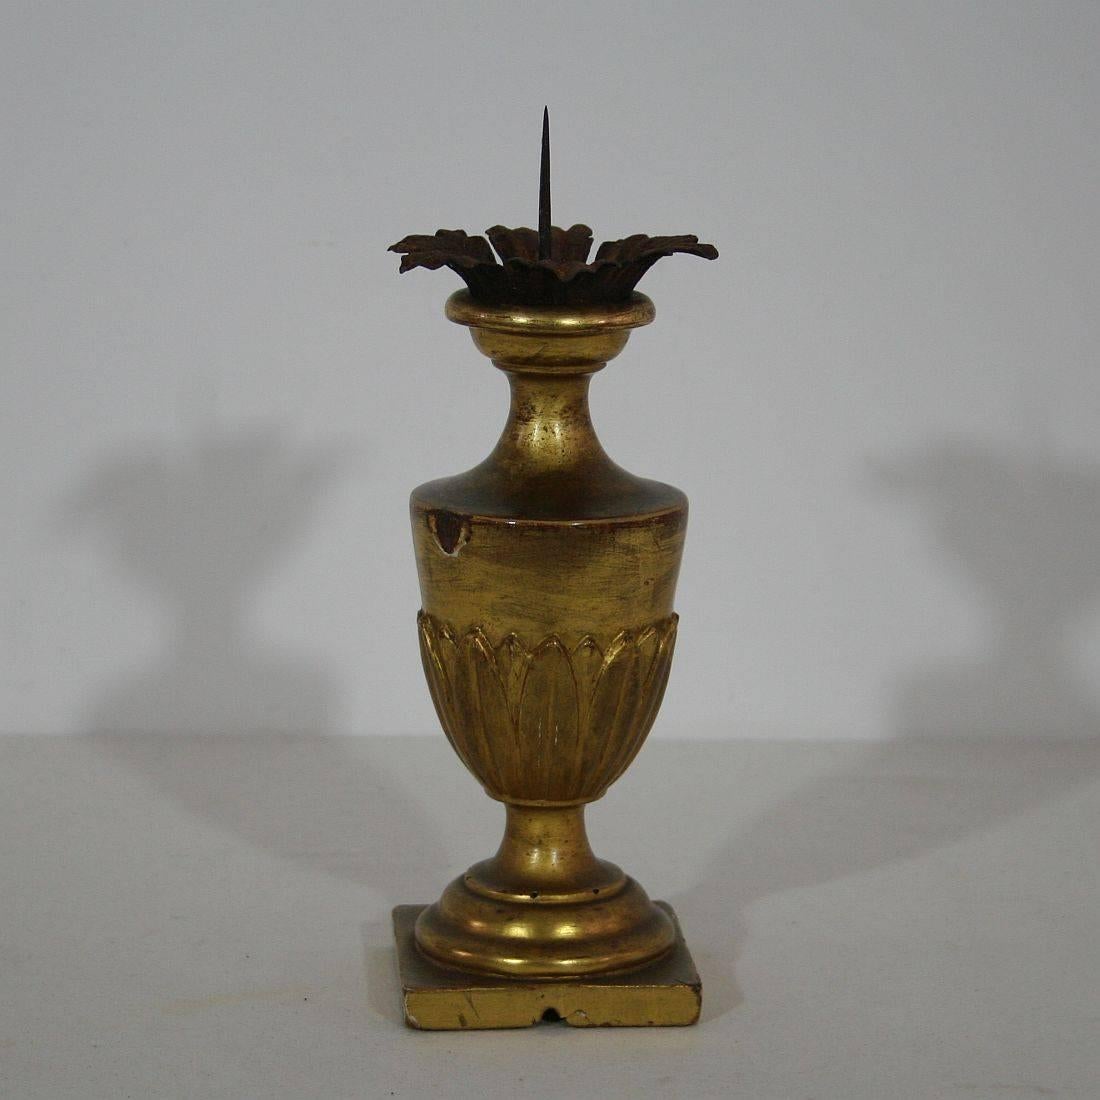 French Small Early 19th Century Italian Neoclassical Giltwood Candlestick